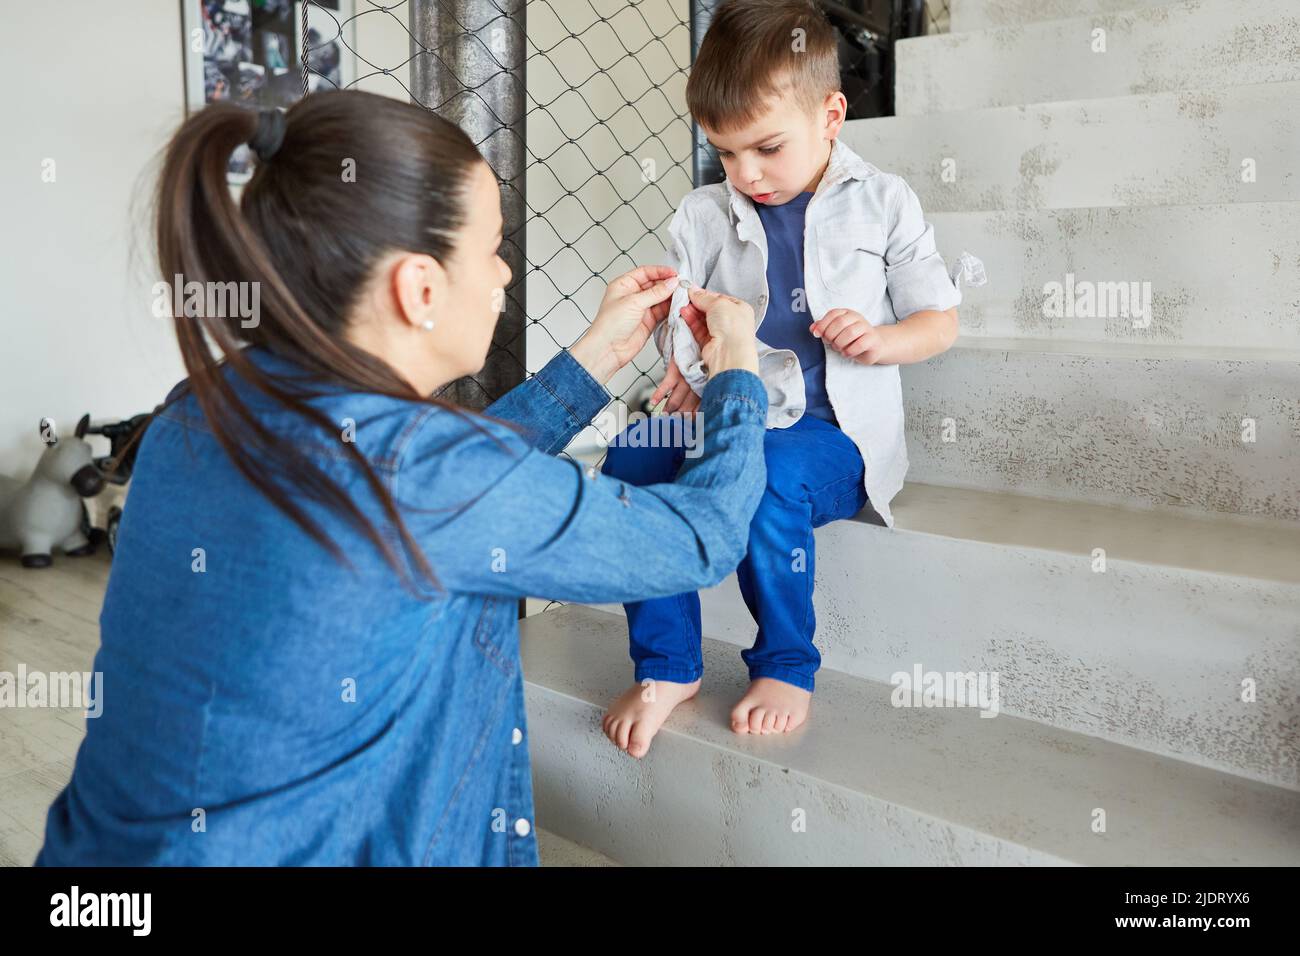 Single mother helping her son put on a shirt at home Stock Photo